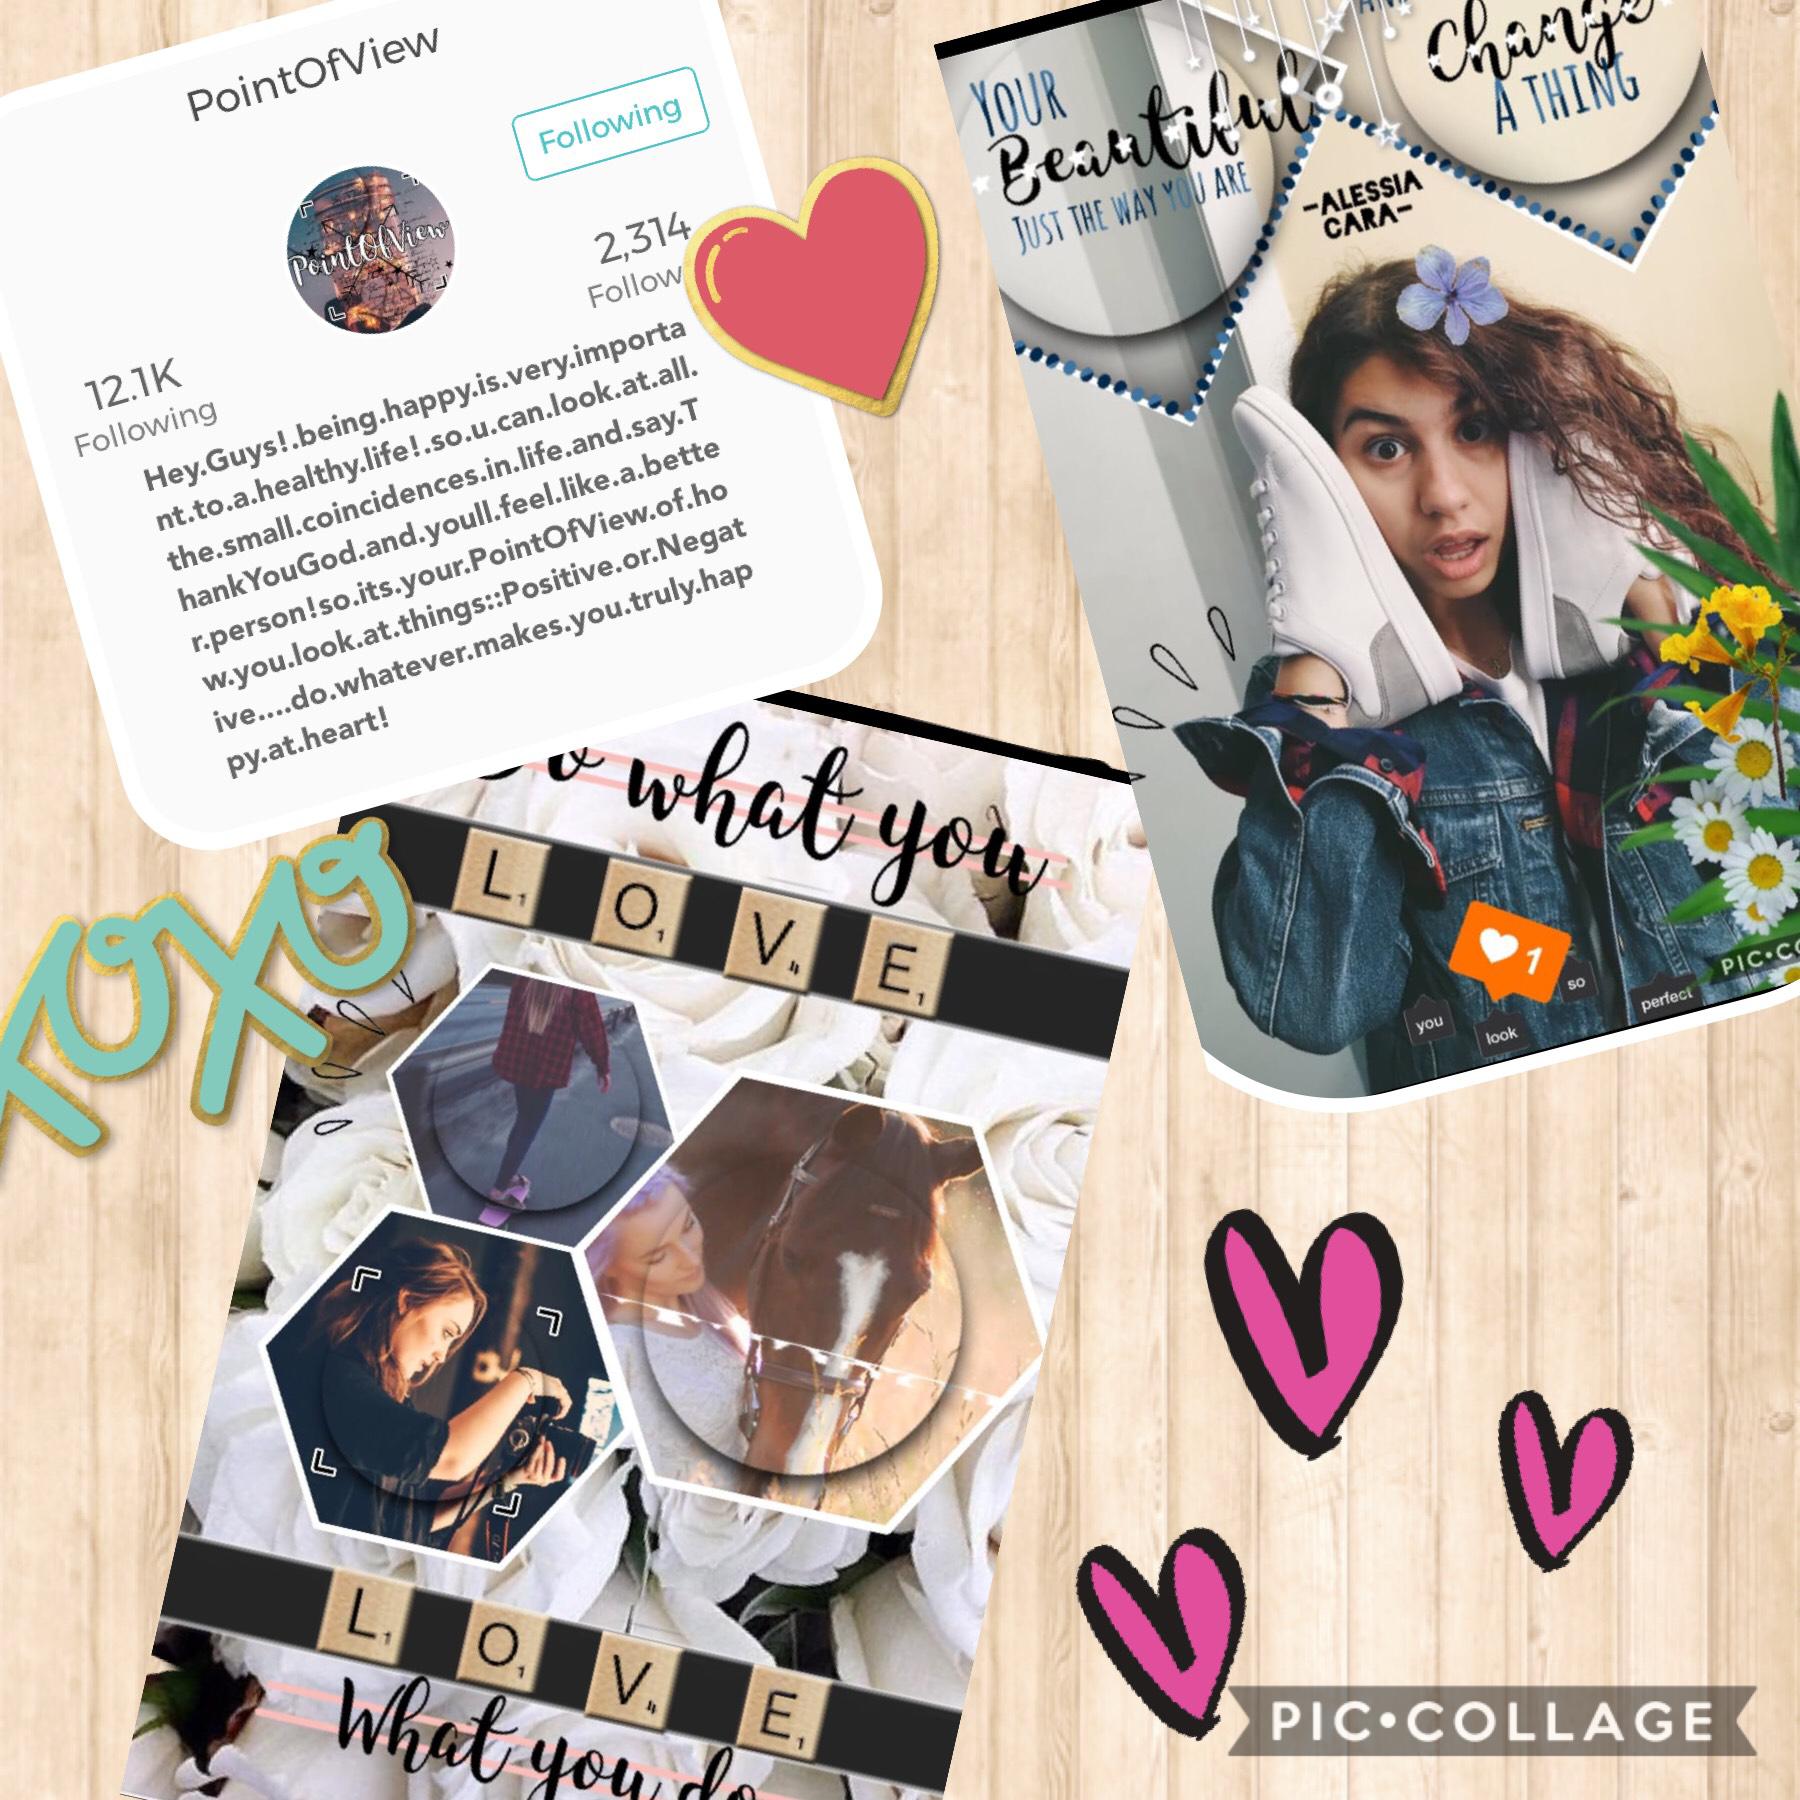 ❤️Tap❤️
So you were my first fan and I just have to say you are AMAZING! You have awesome collages! ❤️ 

 Giving shoutouts to ALL my fans❤️